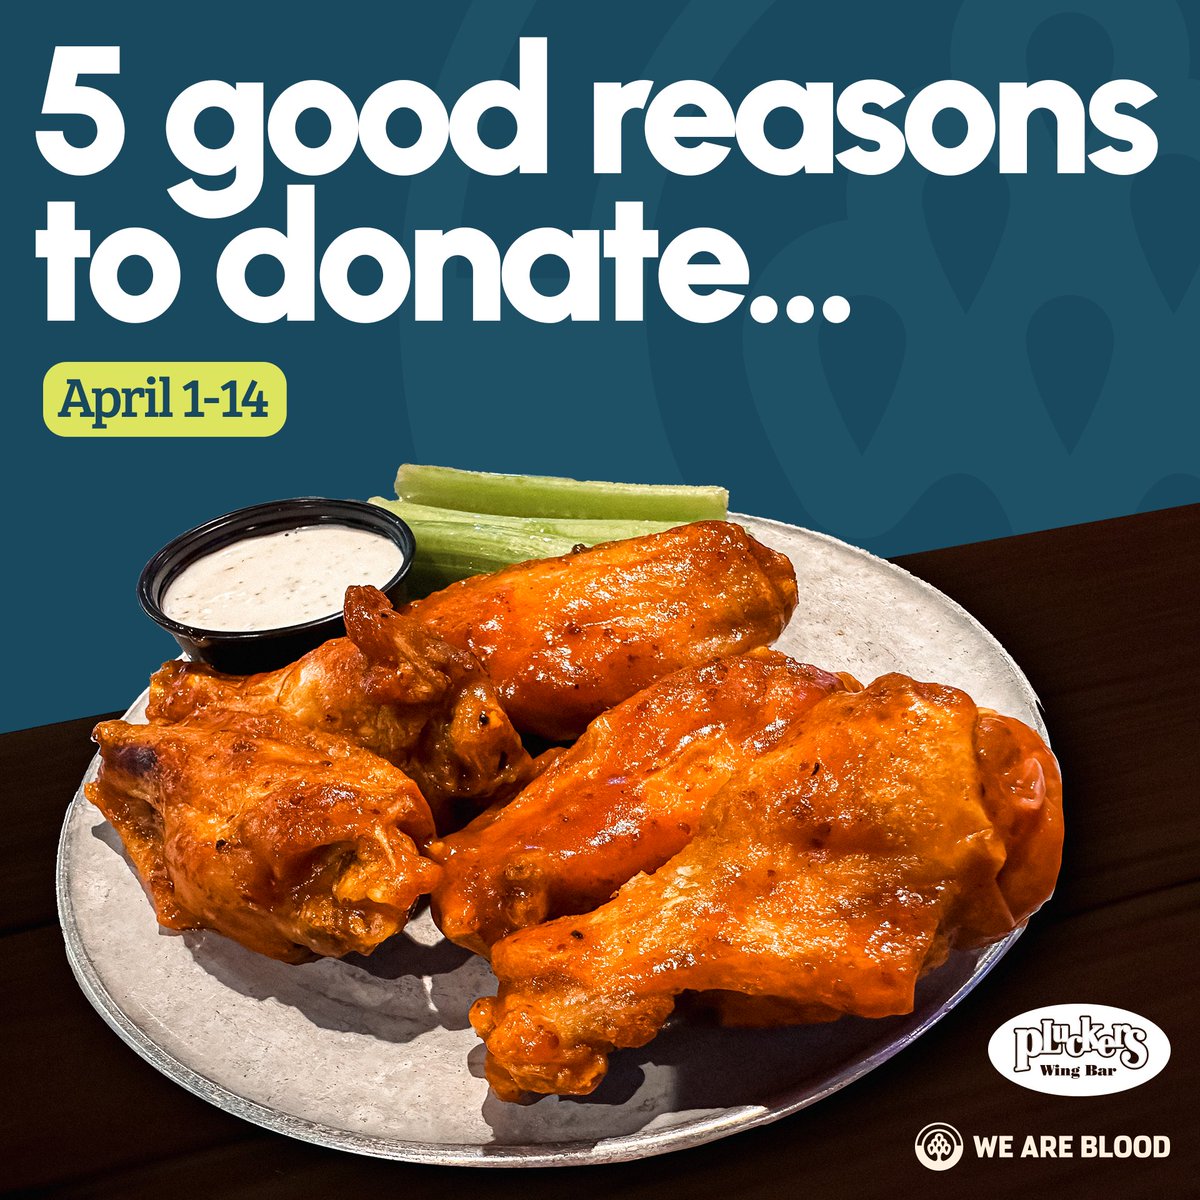 April is here, and there are five good reasons to donate this month... donate blood or platelets from April 1-14, and you'll get a voucher for five FREE wings from @Pluckers! 🍗😋 Get your good deeds and good eats in one go! 👉 weareblood.org/donor